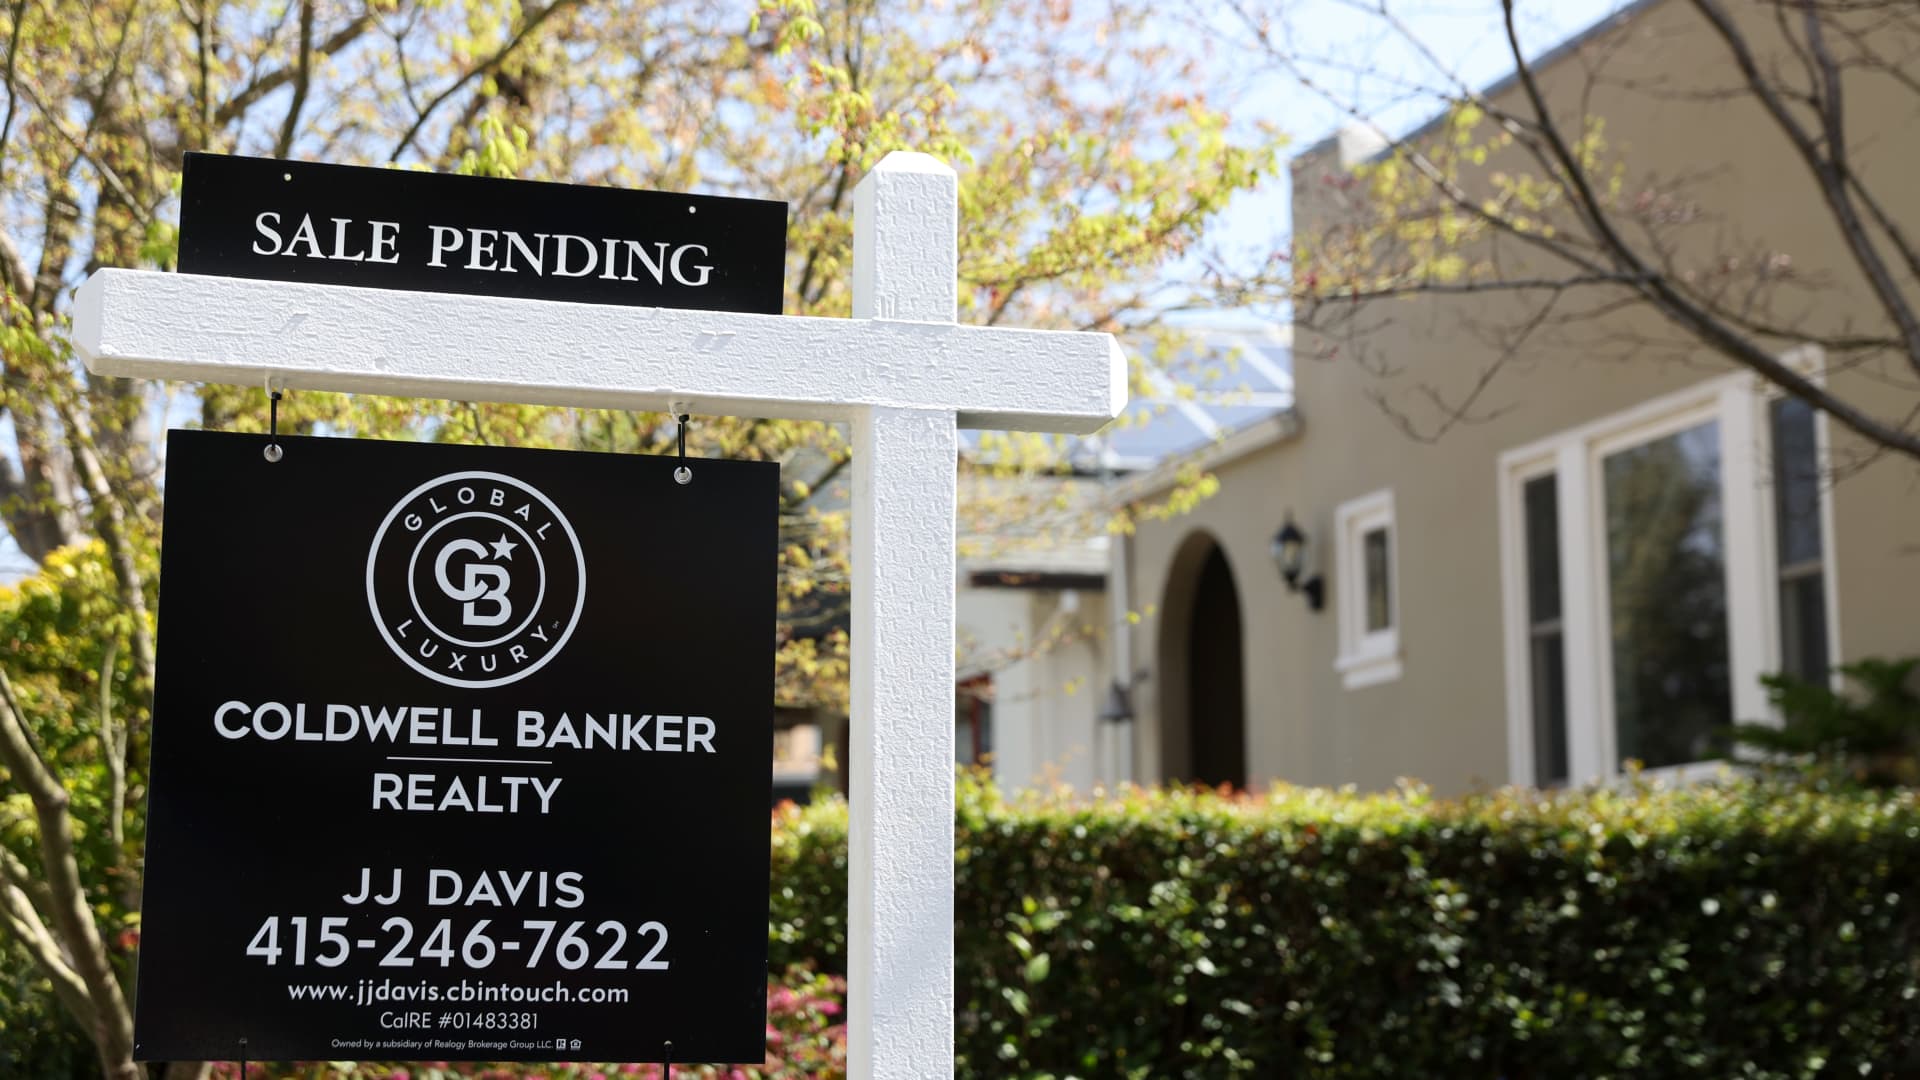 Existing home sales fell in April to the lowest level since the start of the pan..